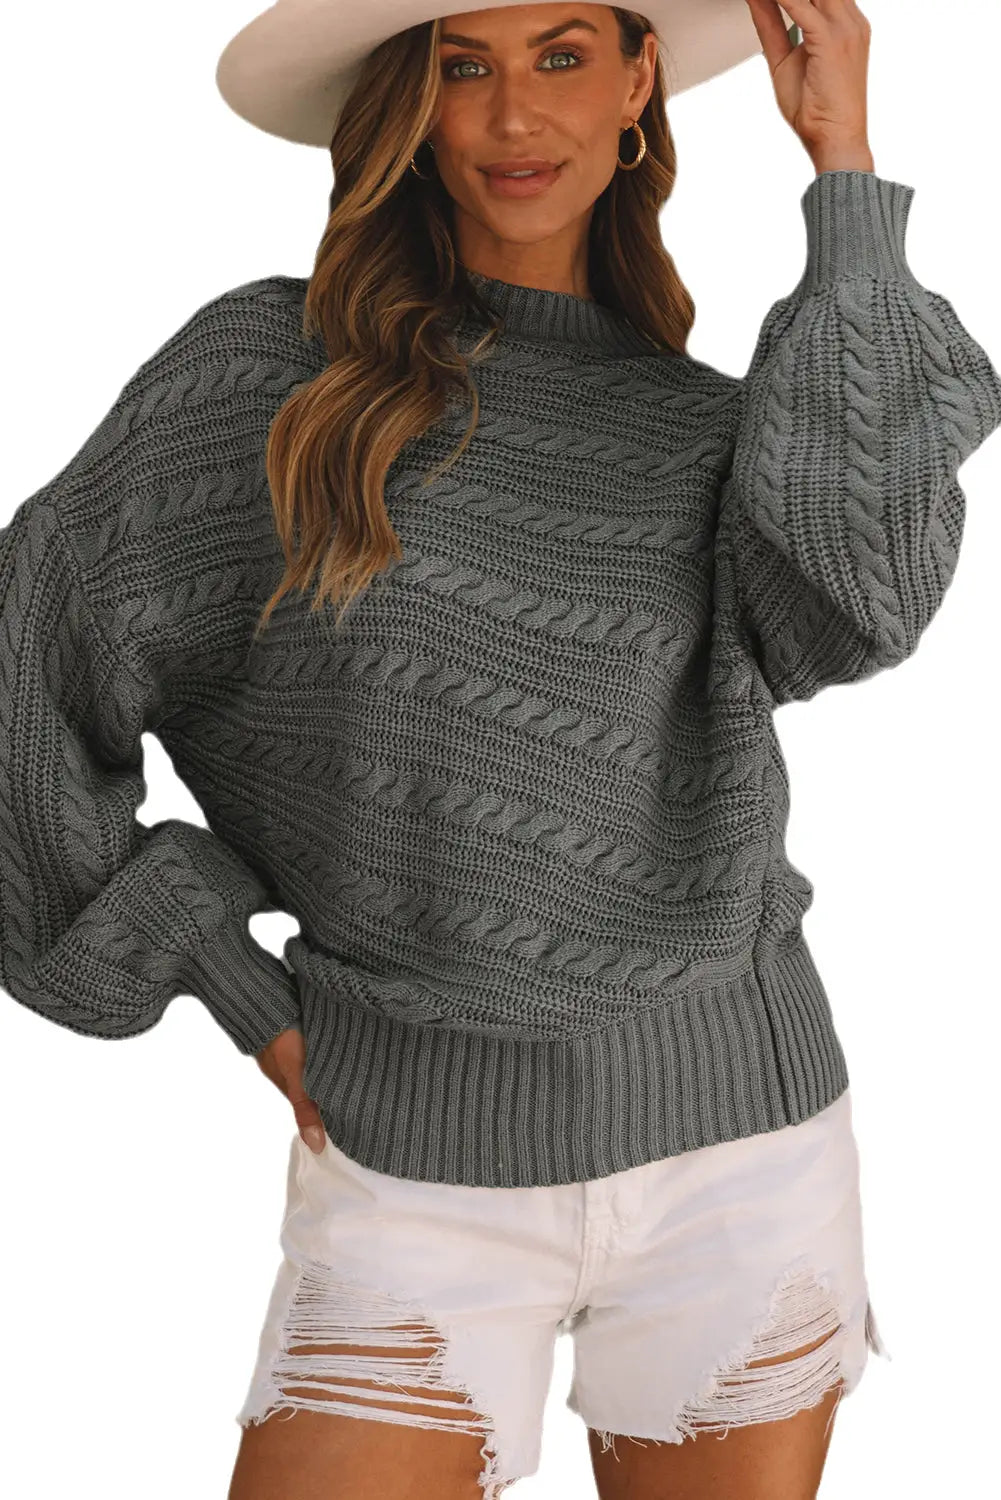 Gray mock neck lantern sleeve cable knit sweater - sweaters & cardigans